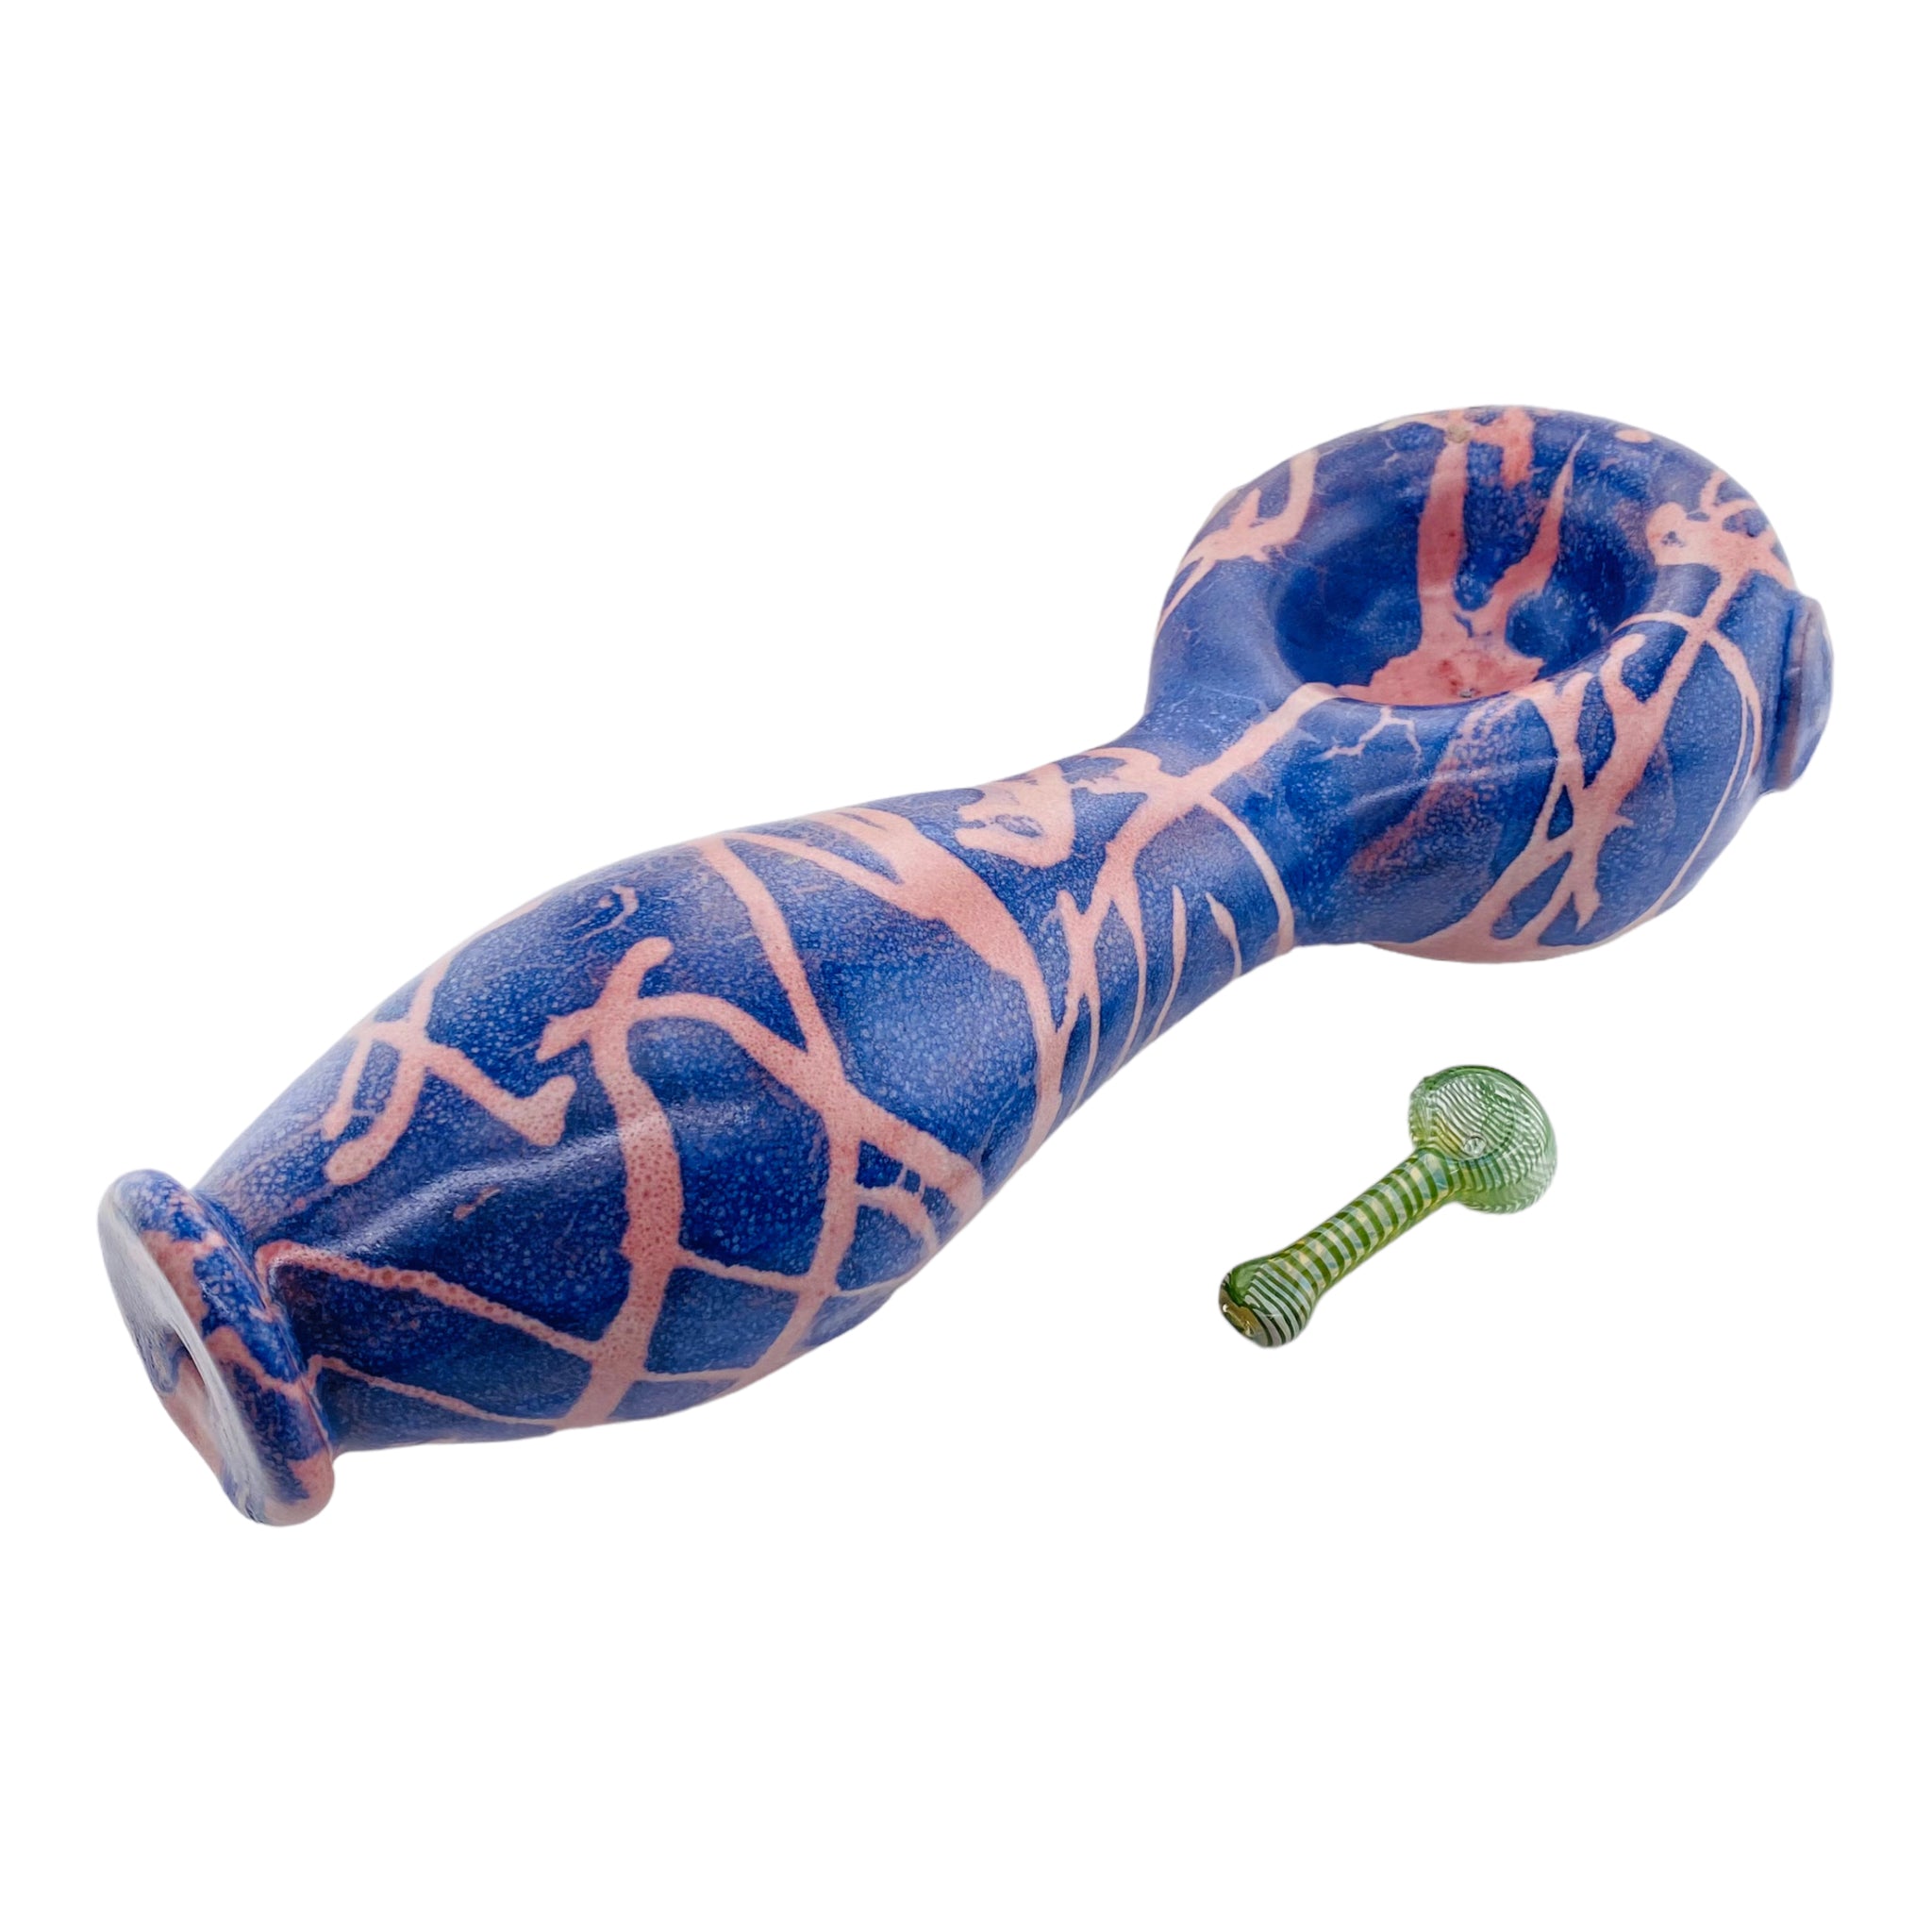 Mile High Potter - "Big F'ing Pipe" Extra Extra Large Ceramic Hand Pipe